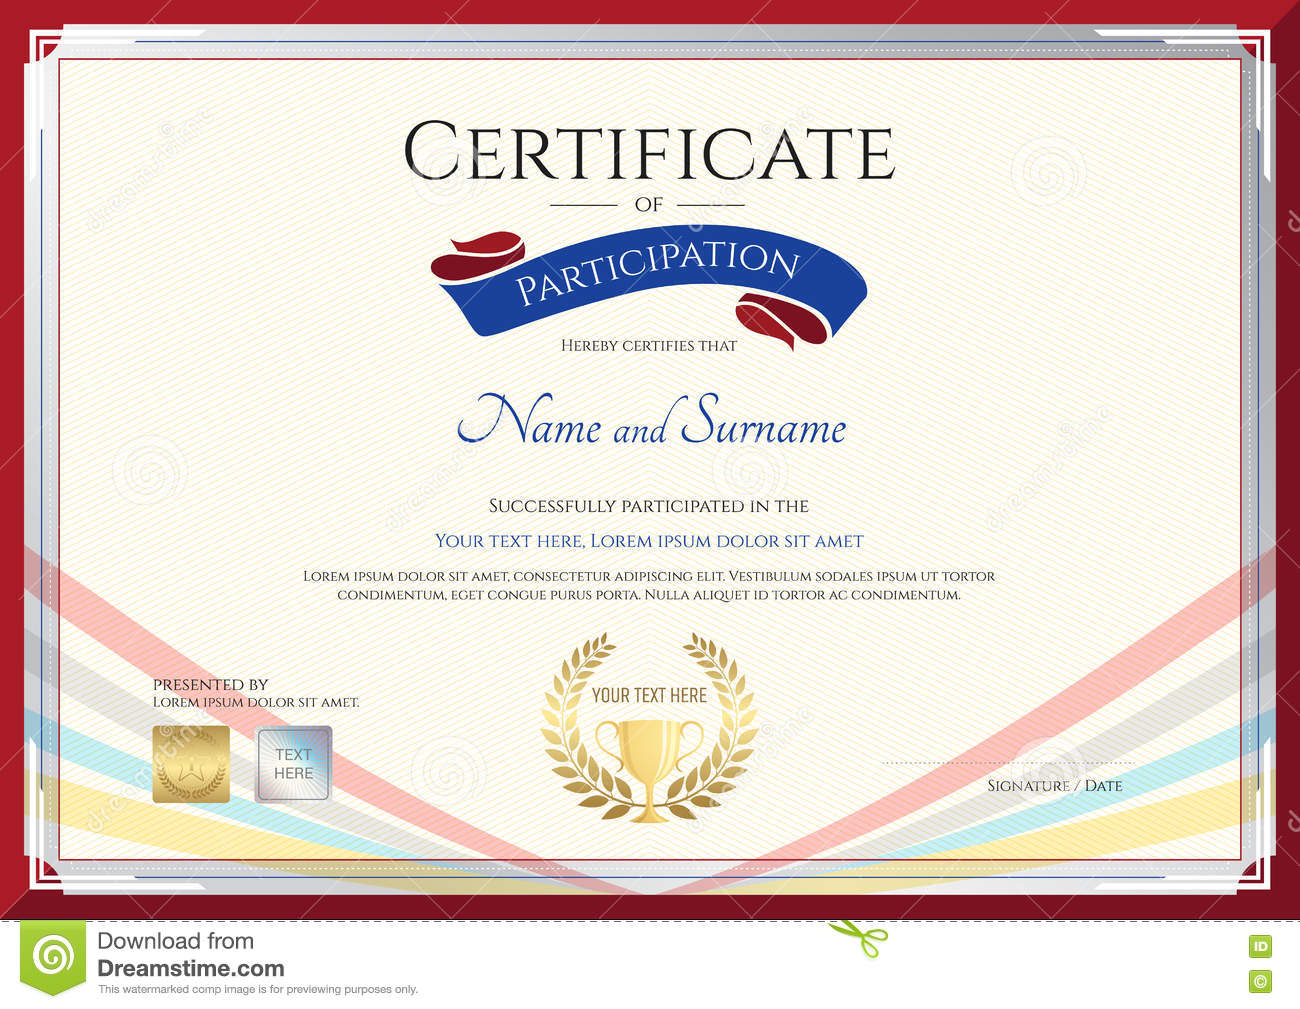 Certificate Template For Achievement, Appreciation Or Within In Conference Participation Certificate Template